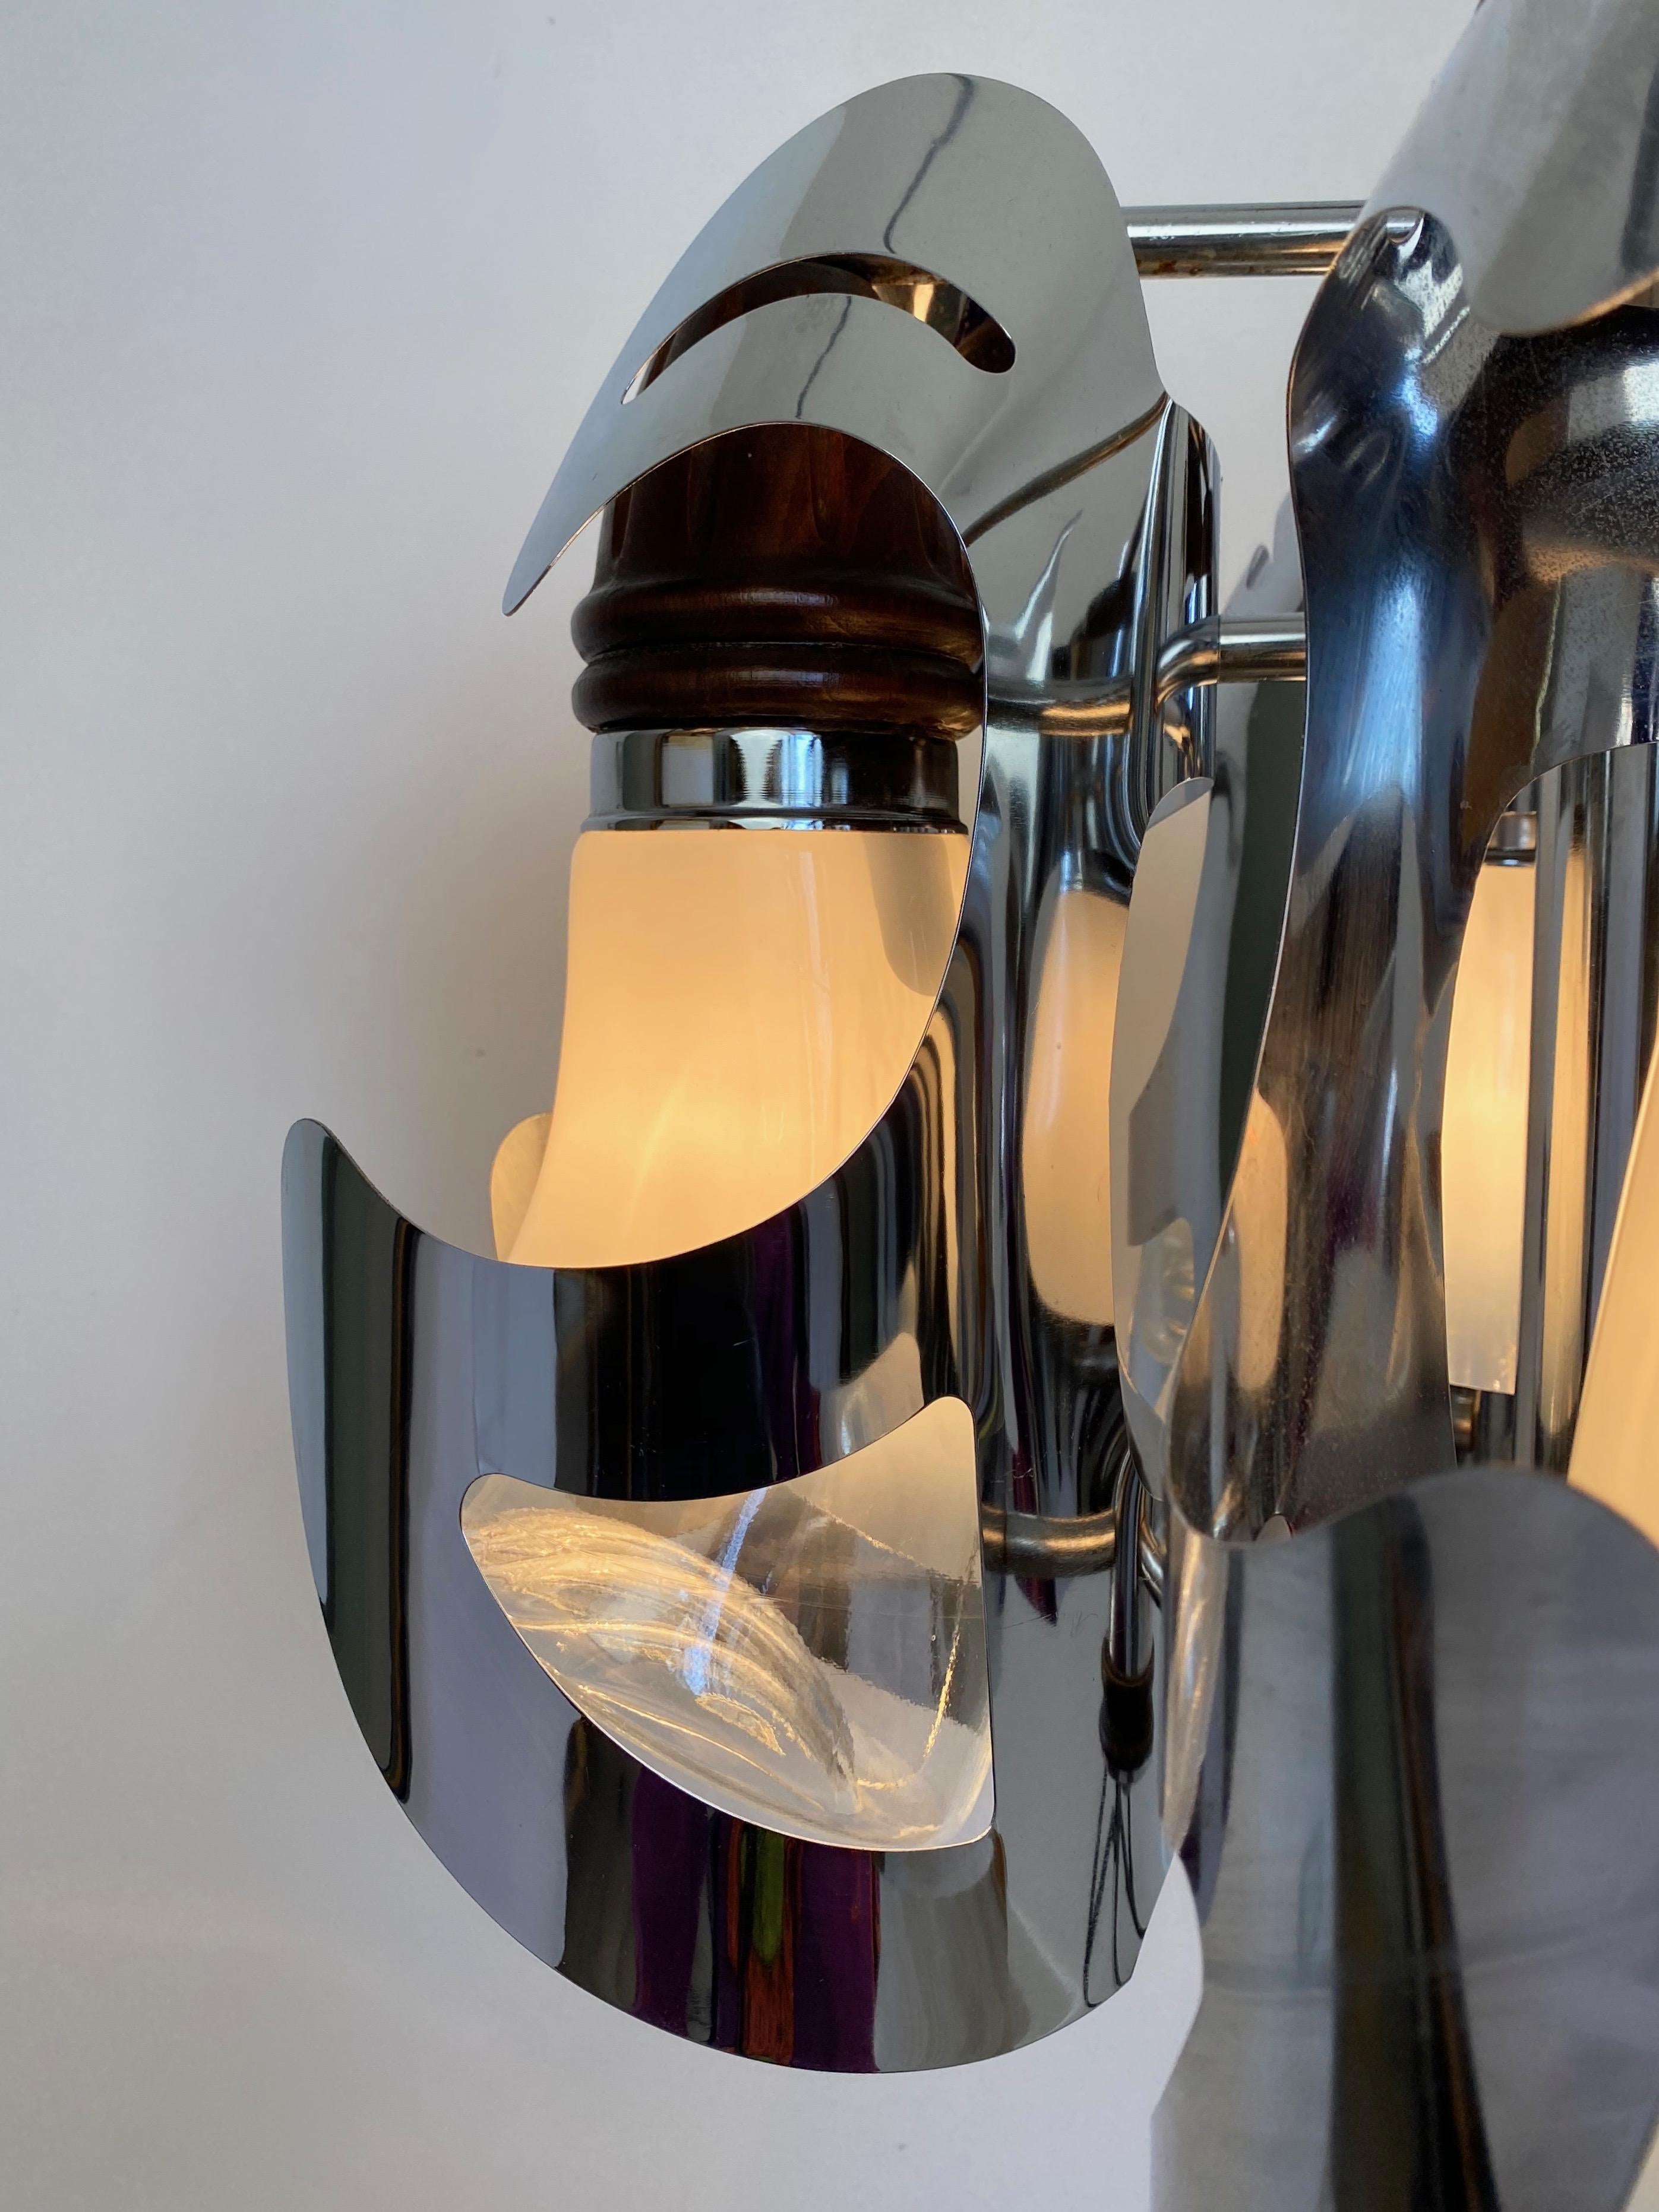 Chandelier by Mazzega Chrome, Wood and Murano Glass, Italy, 1970s For Sale 5